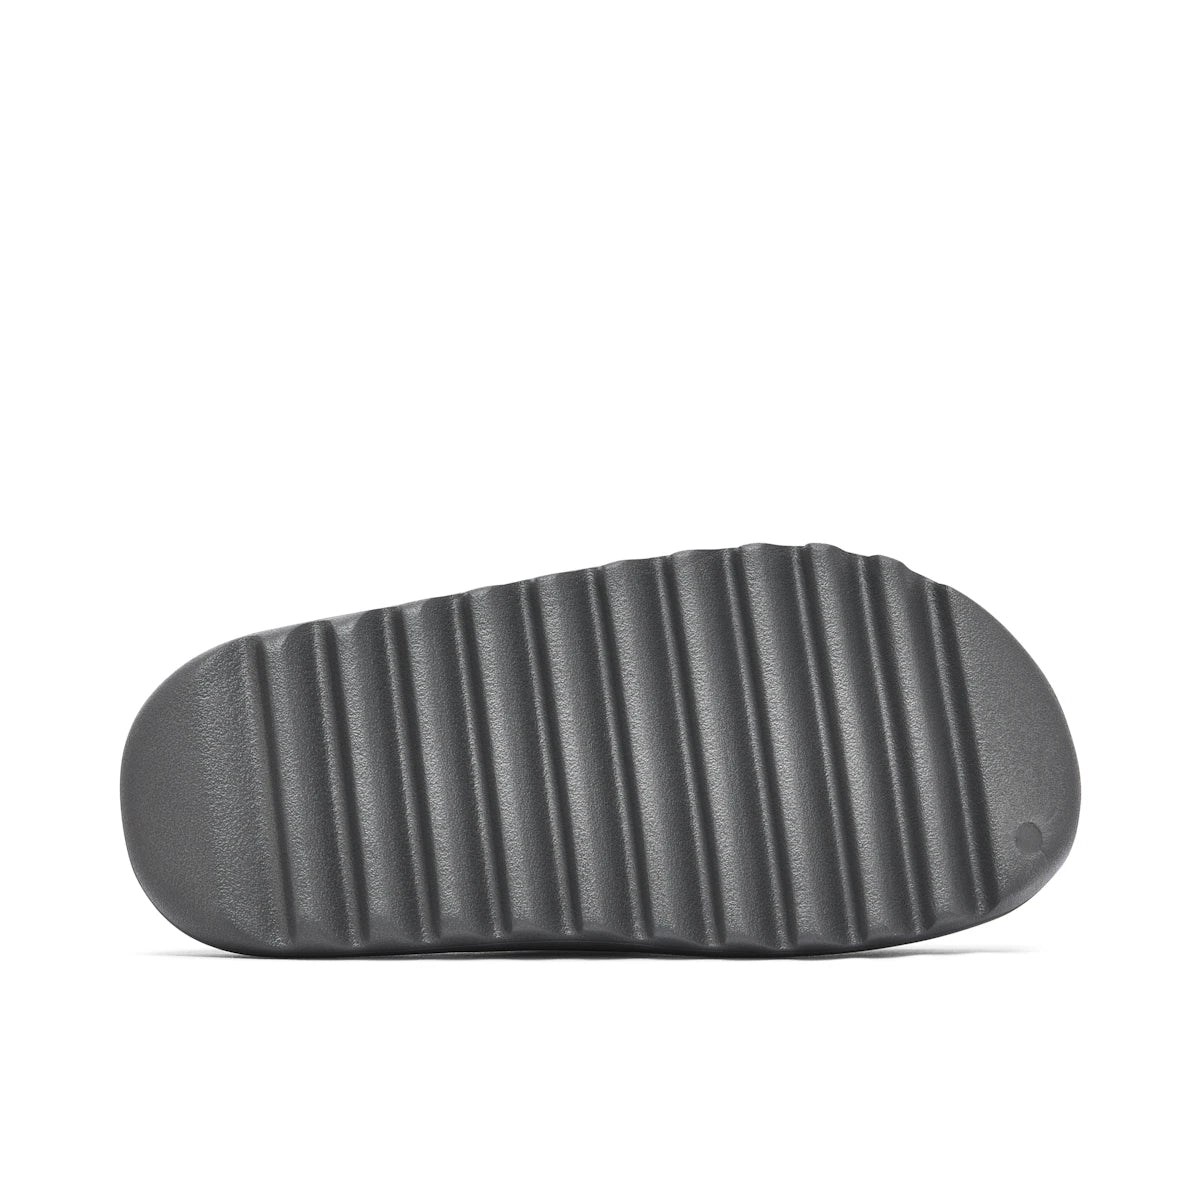 adidas Yeezy Slide Granite by Yeezy from £85.00